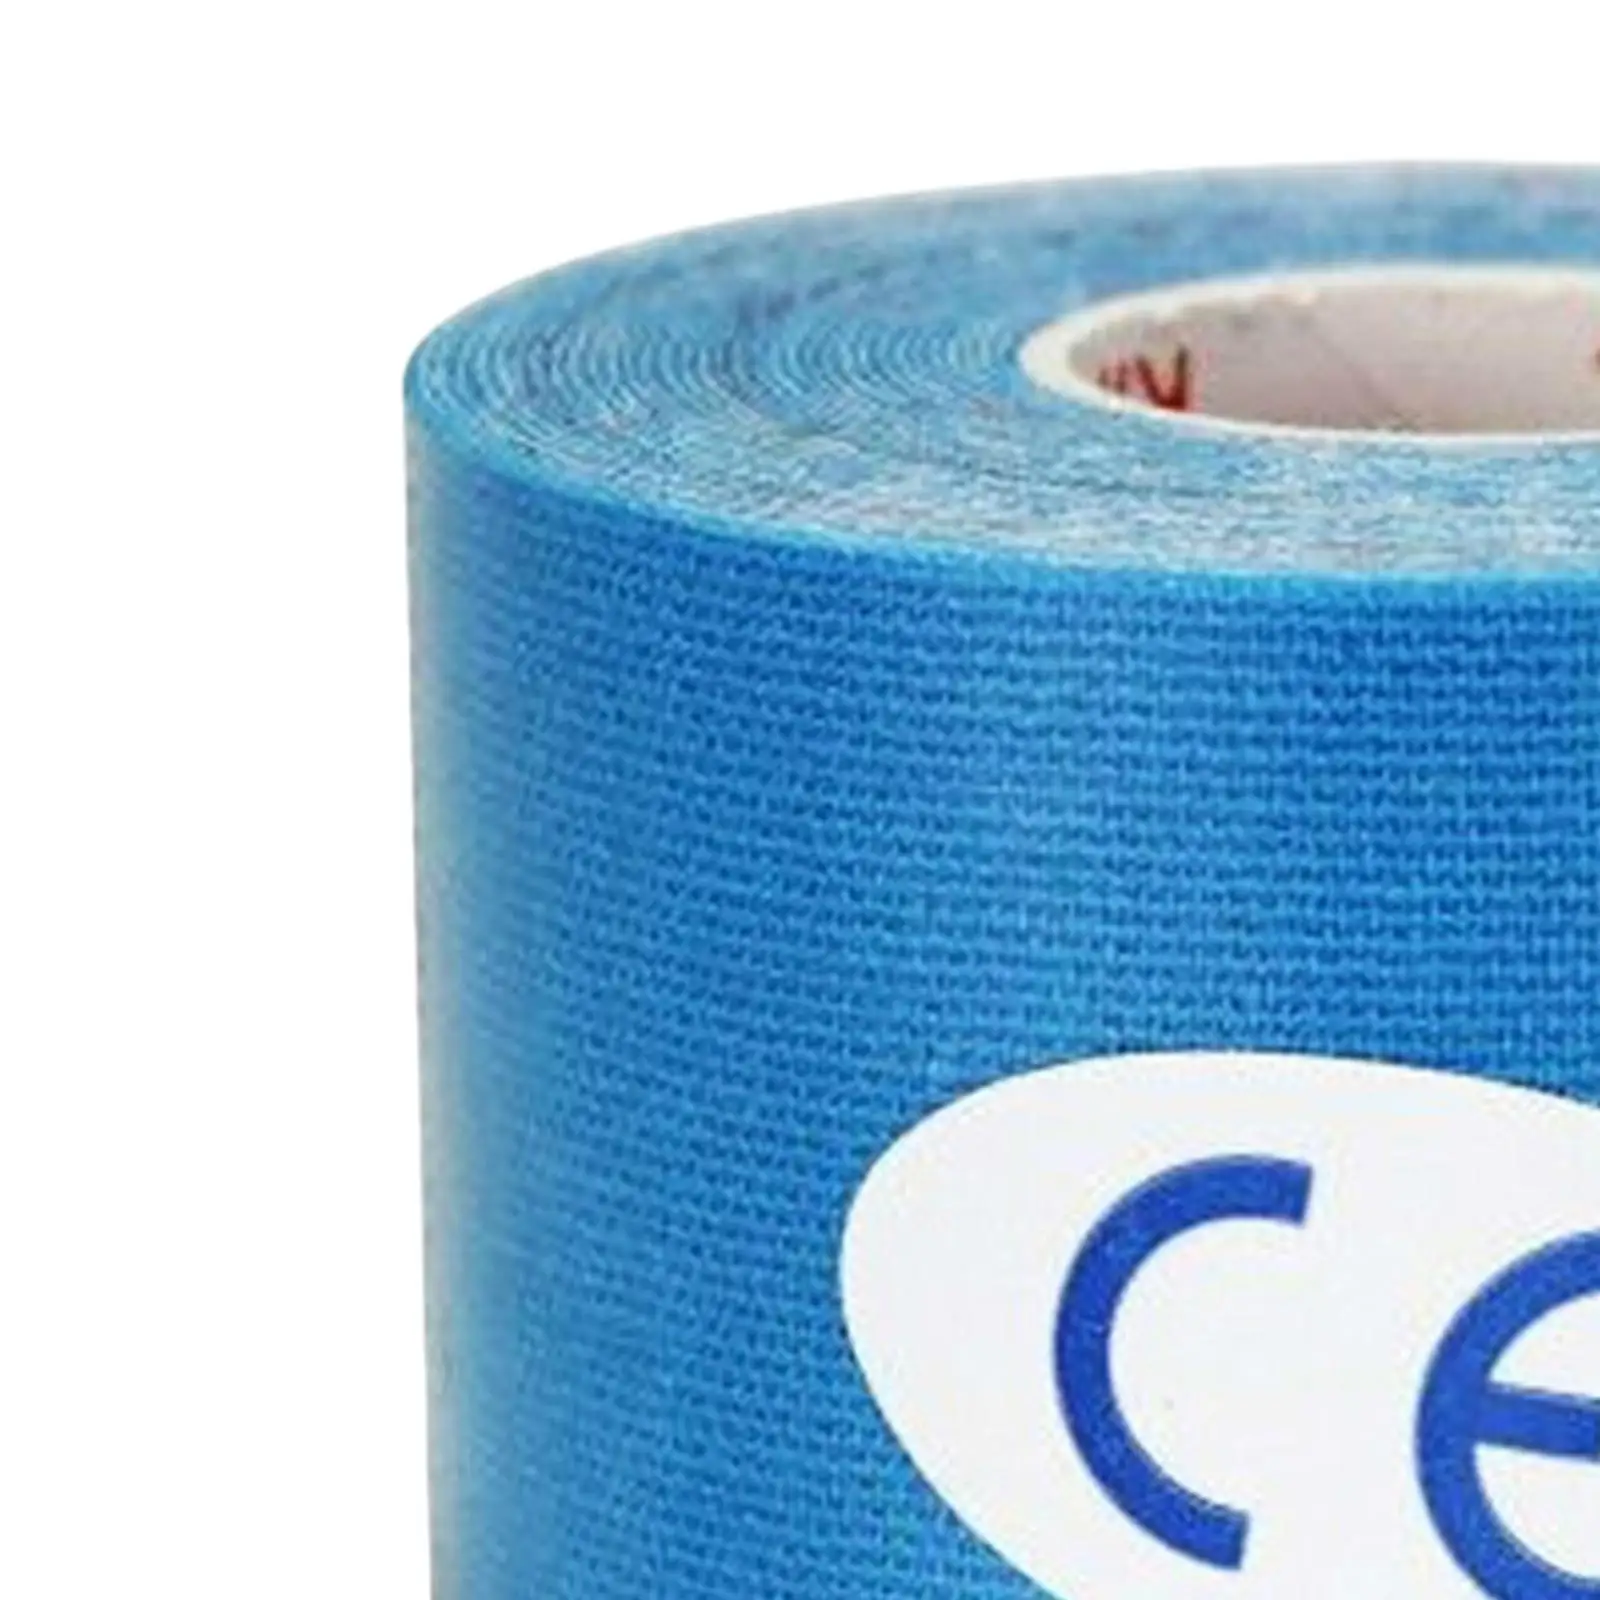 Sports Wrap Tape Elastic Muscle Tape Wrap 5M Roll Waterproof Athletic Tape Protective Tape for Joint Knee Hands Ankles Football